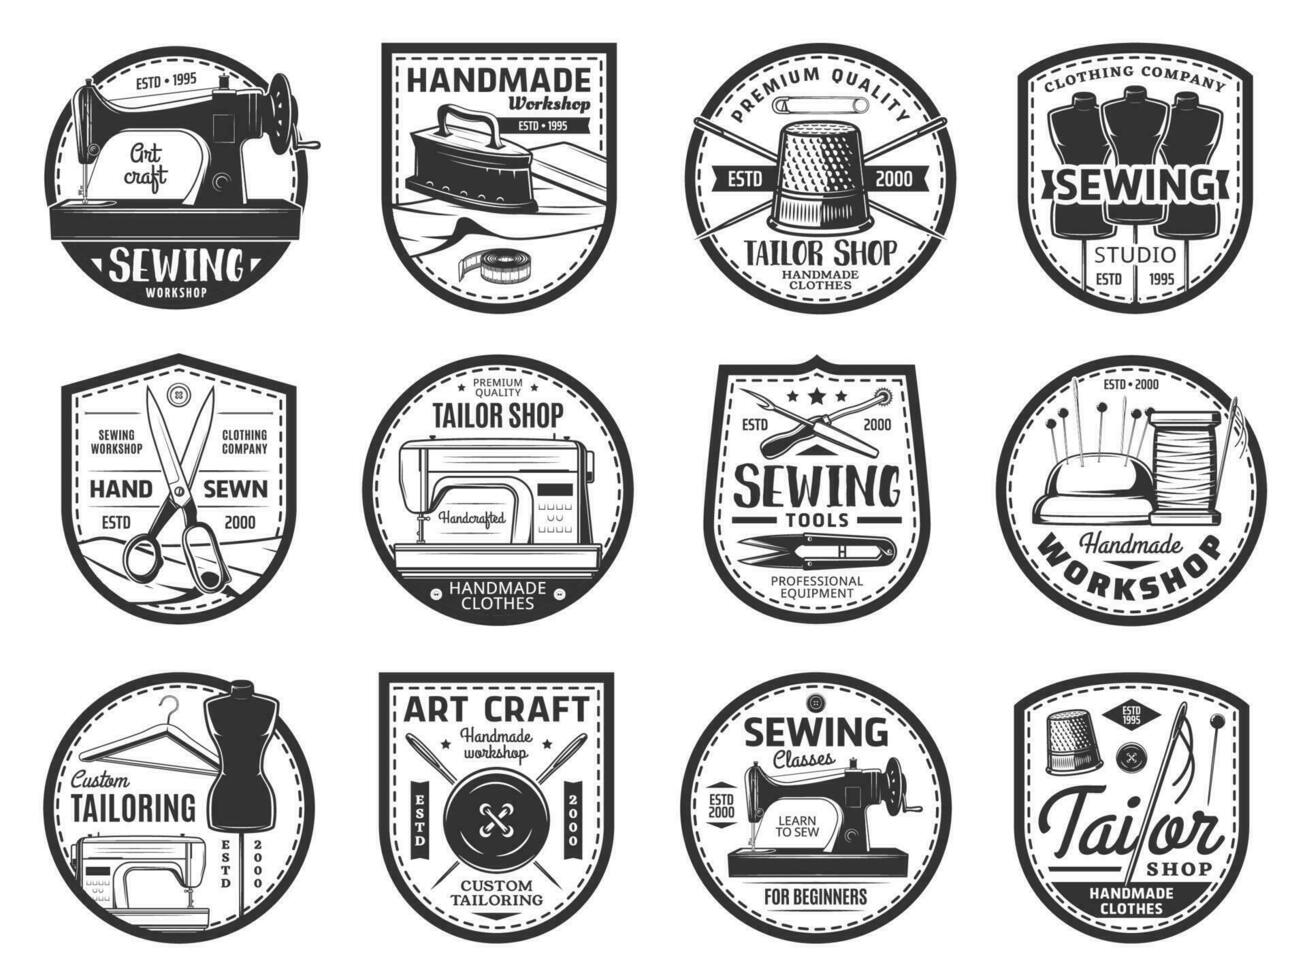 Sewing and tailor icons, threads, needles, buttons vector